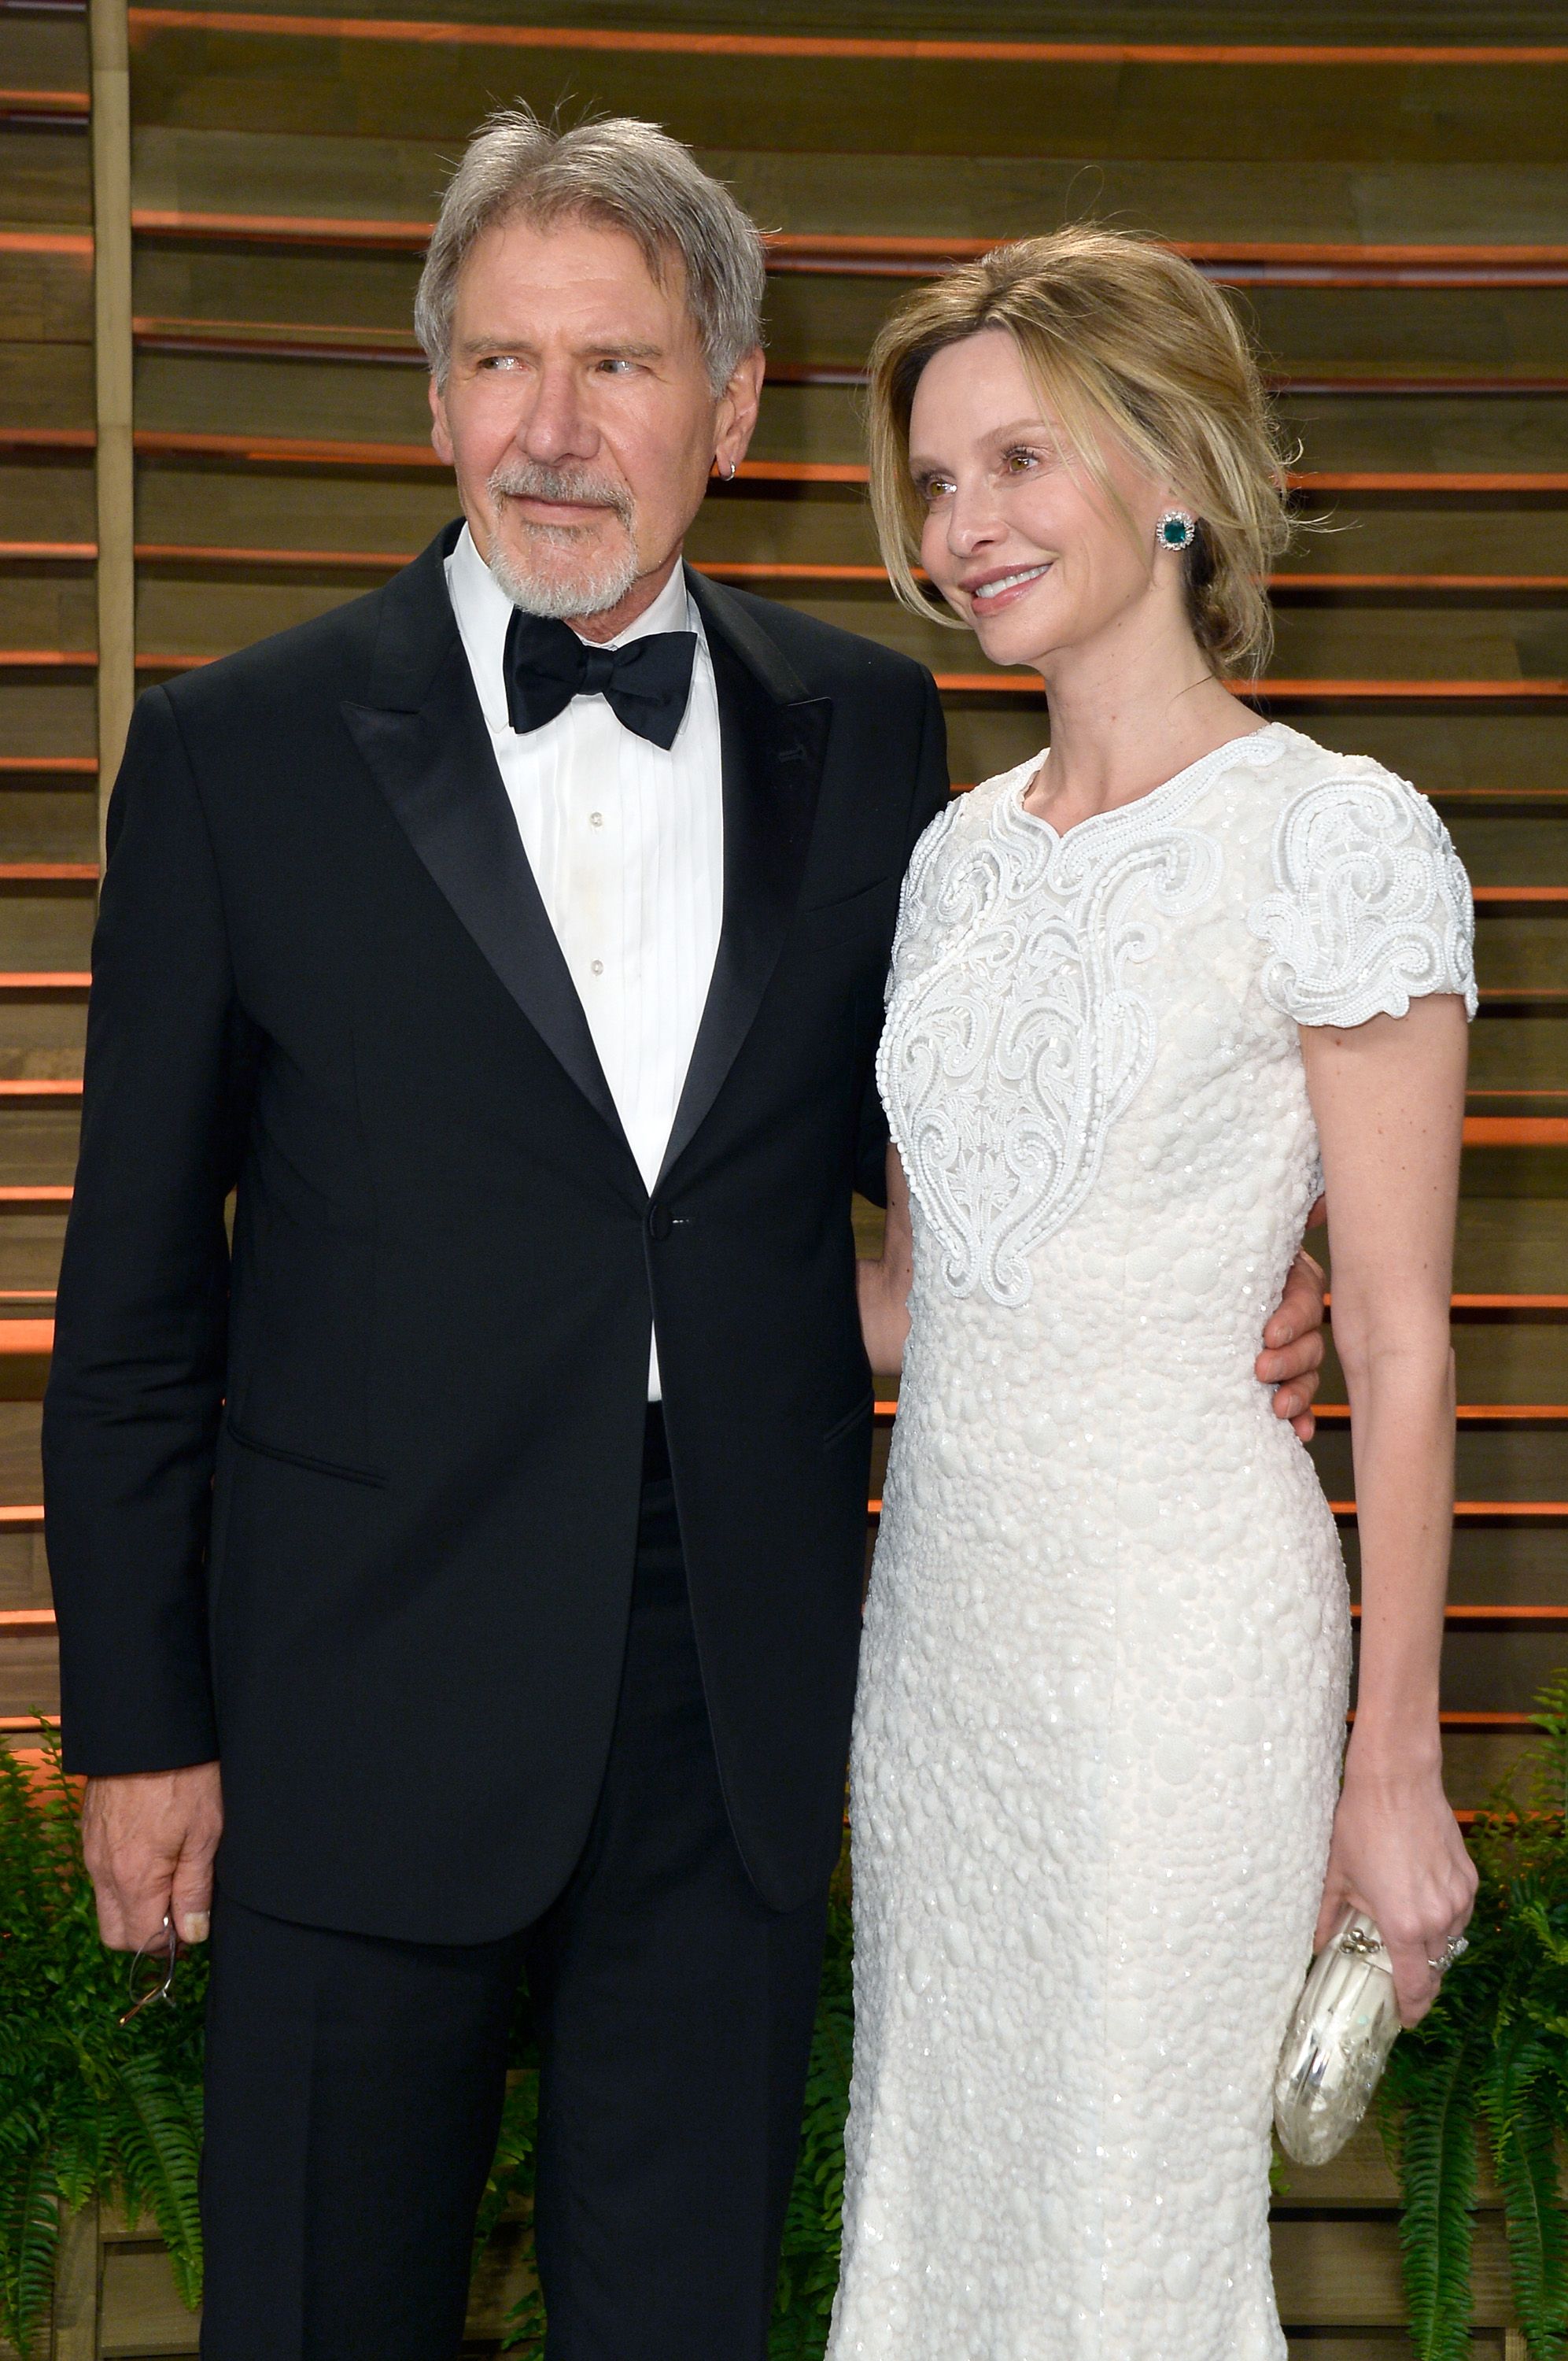 Harrison Ford holds wife Calista Flockhart in a white dress.